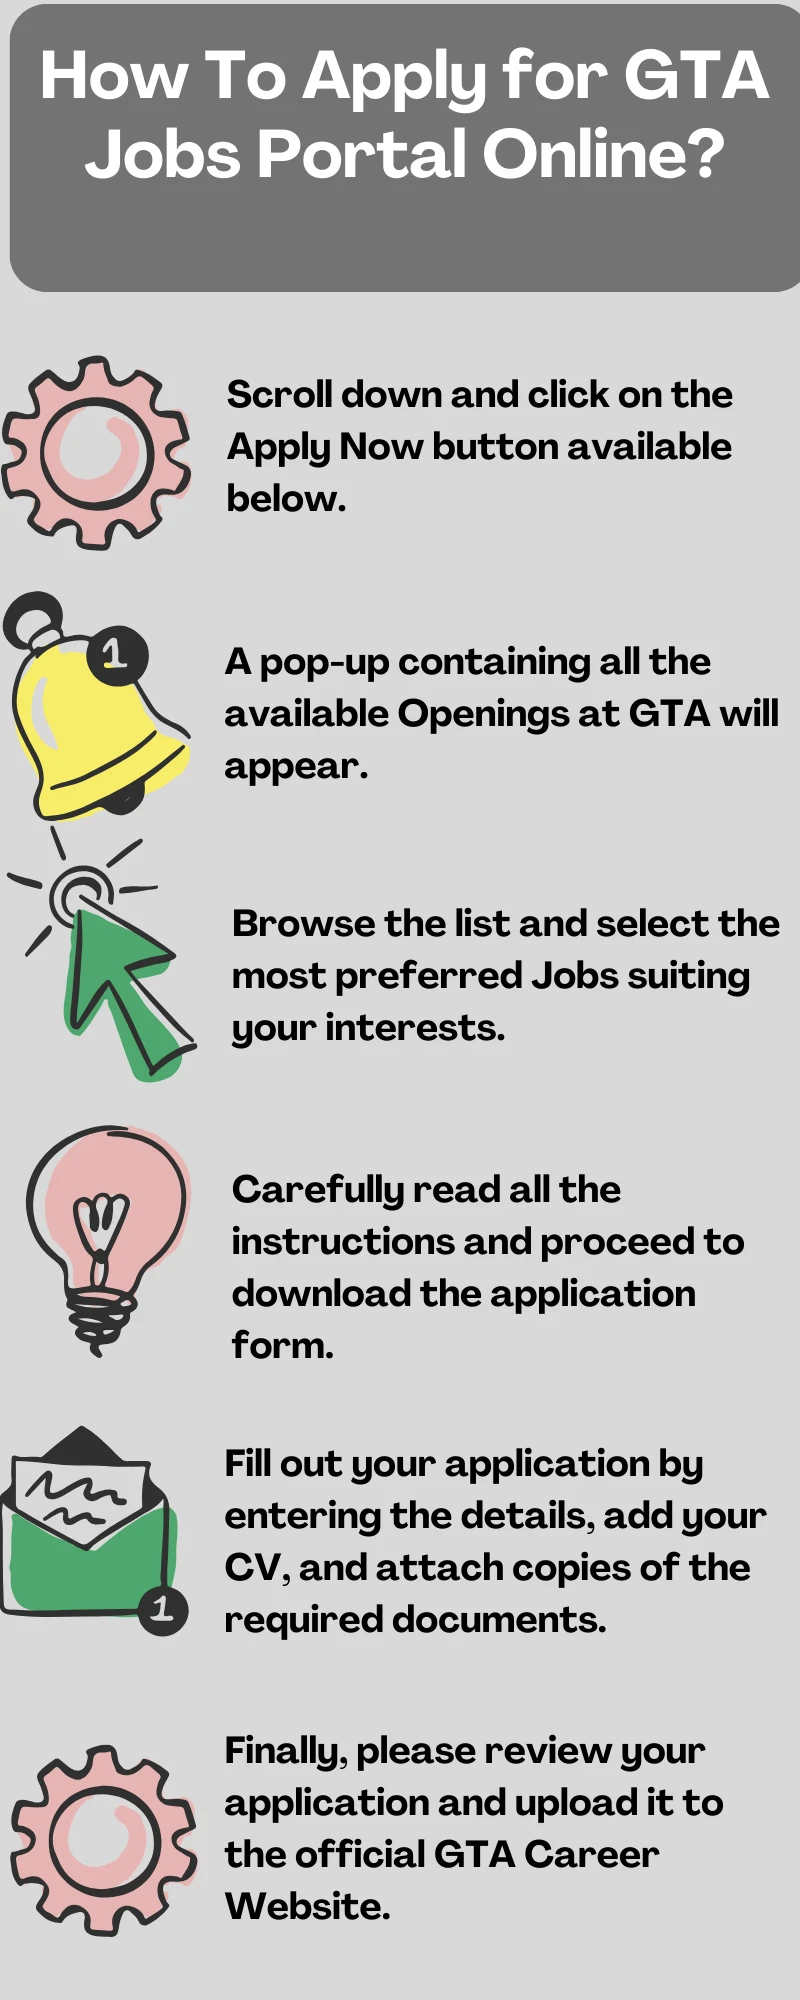 How To Apply for GTA Jobs Portal Online?